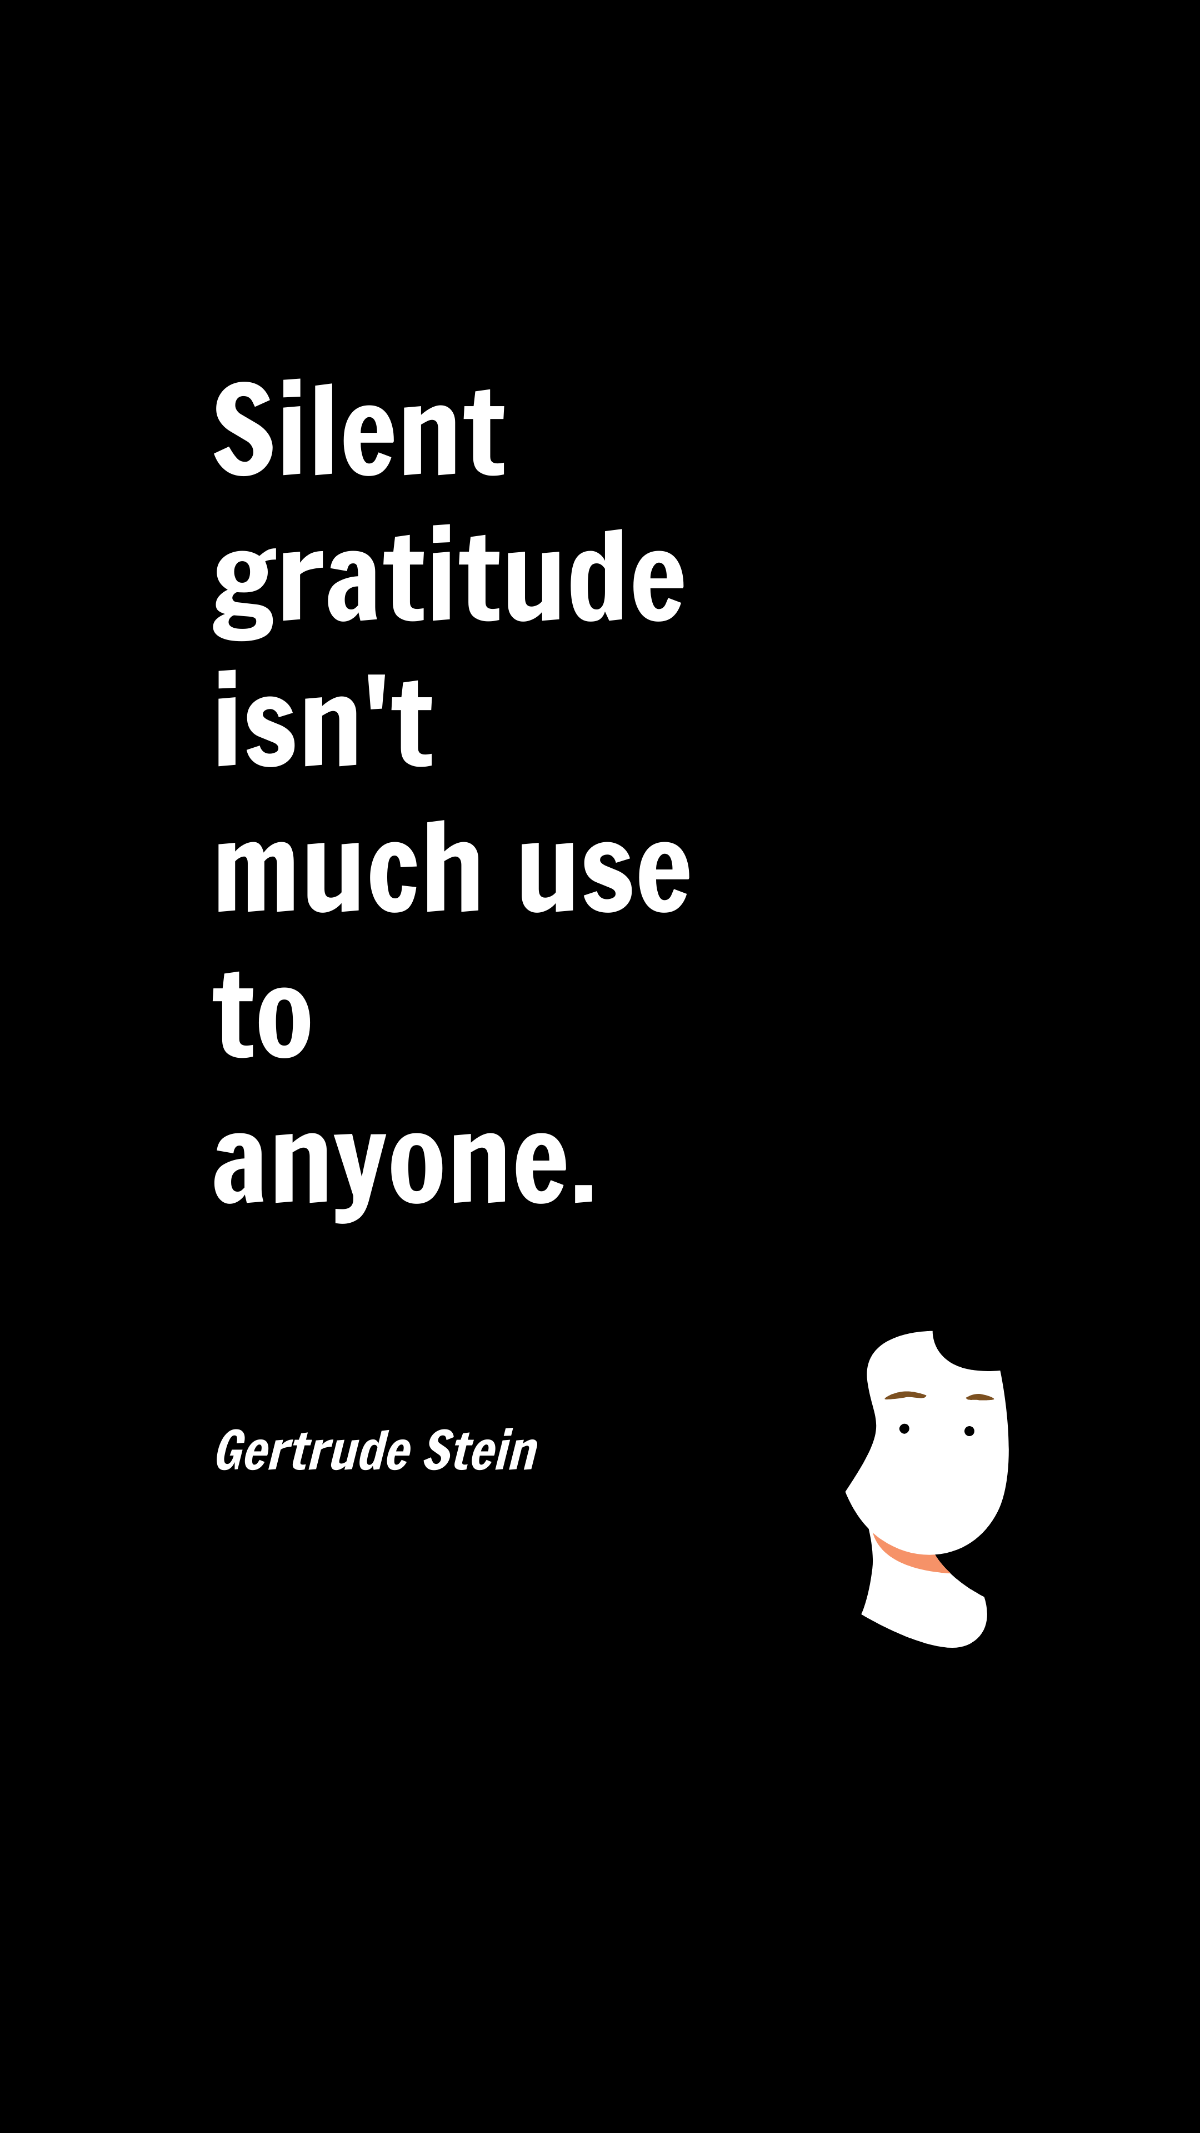 Gertrude Stein - Silent gratitude isn't much use to anyone. Template